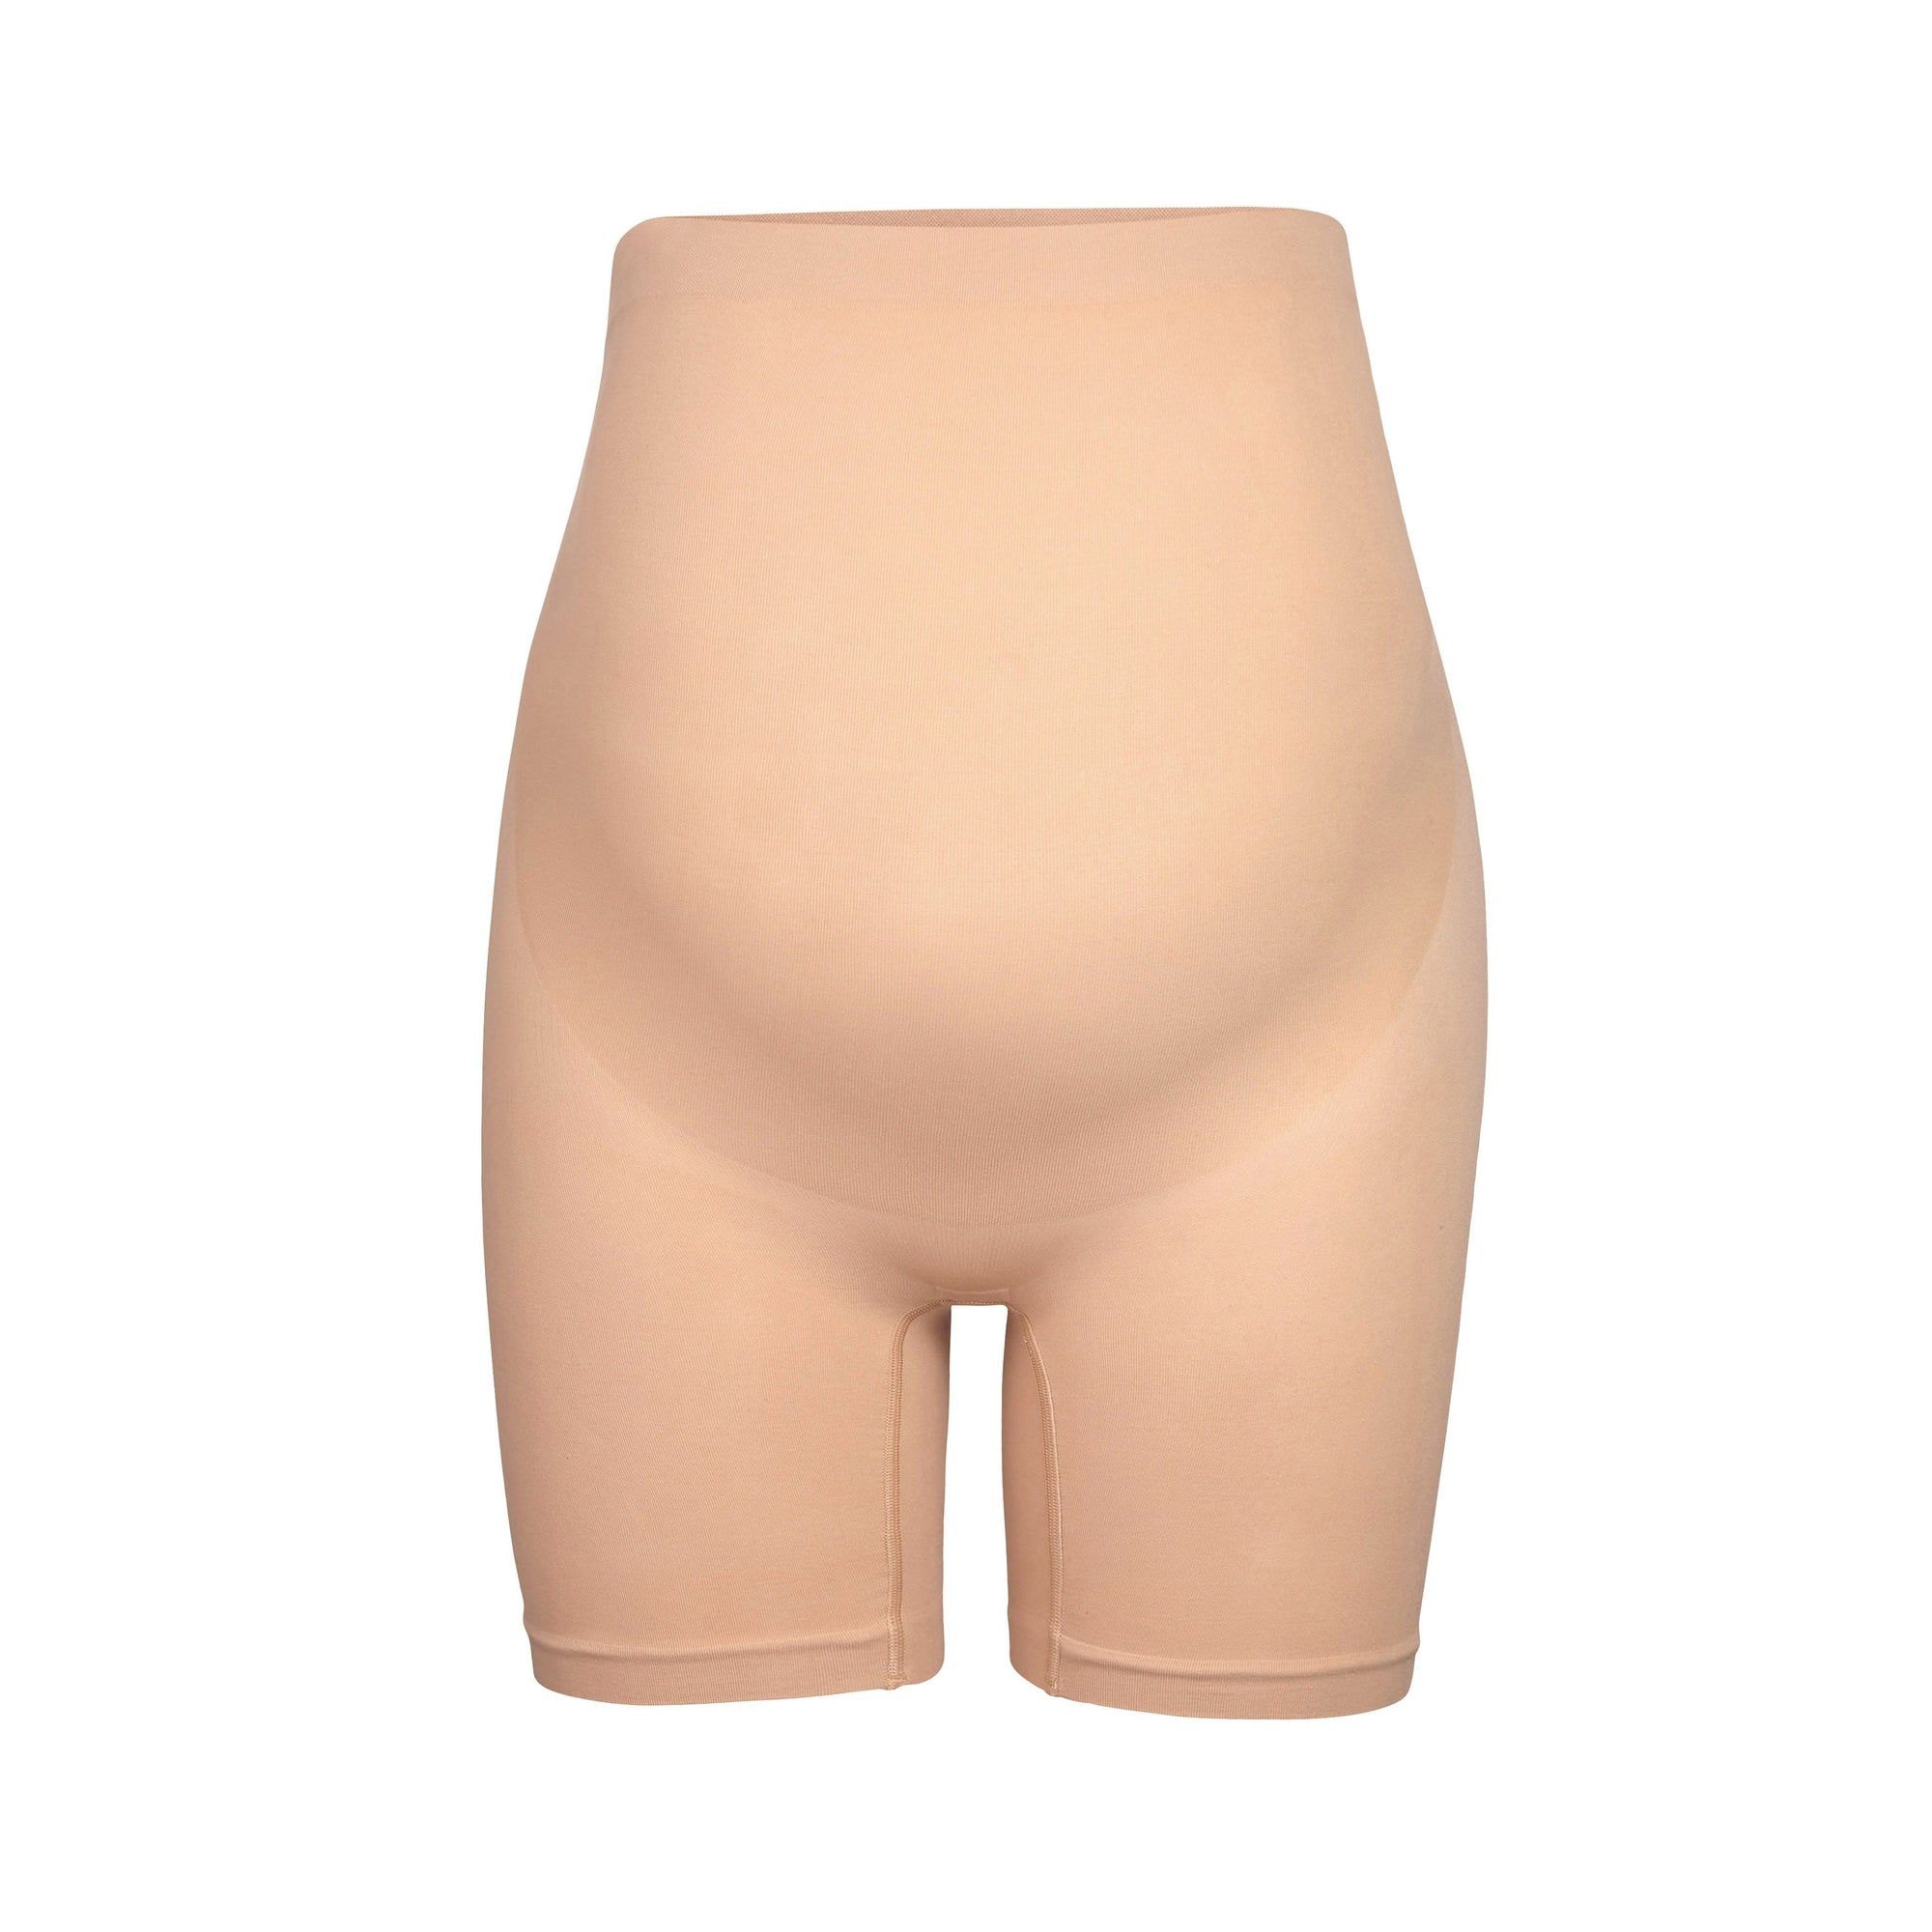 SKIMS Maternity Sculpting Bodysuit Mid Thigh NWOT Tan Size XL - $46 (28%  Off Retail) - From Ali